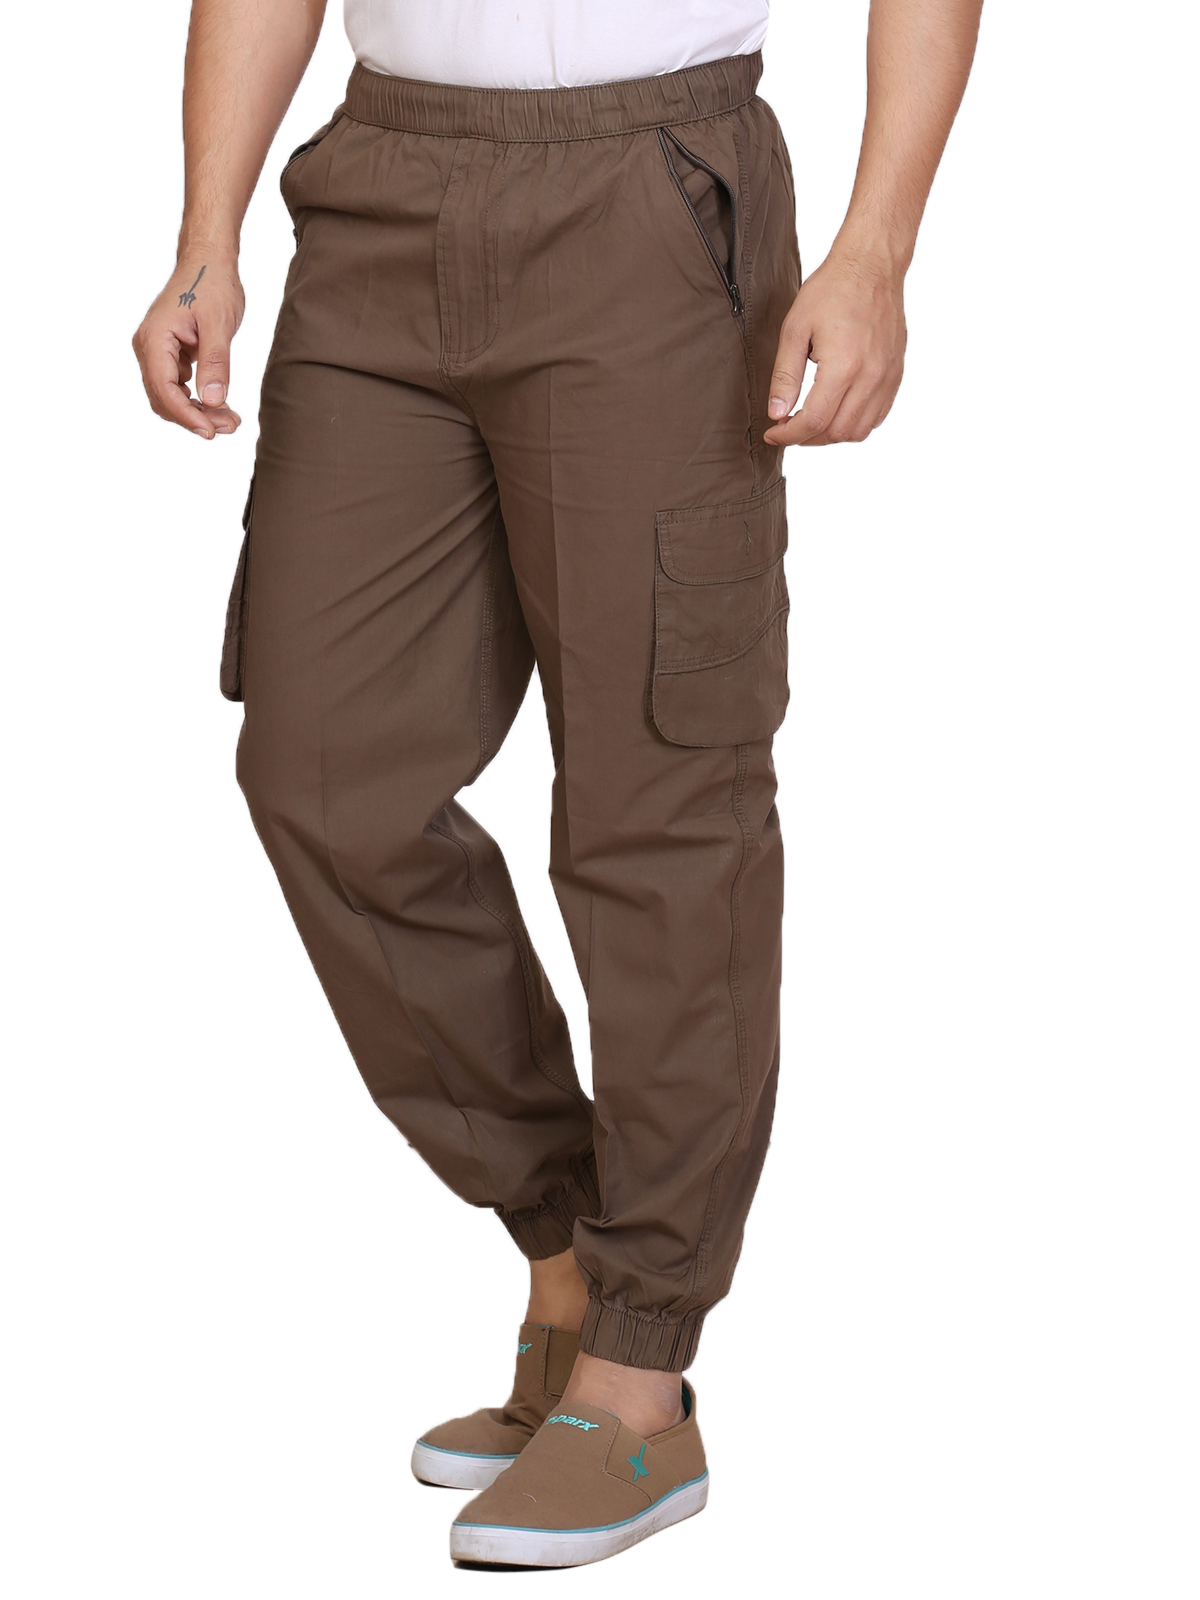 Buy Abc Garments Biege Cargo Pants For Mens Online @ ₹799 from ShopClues